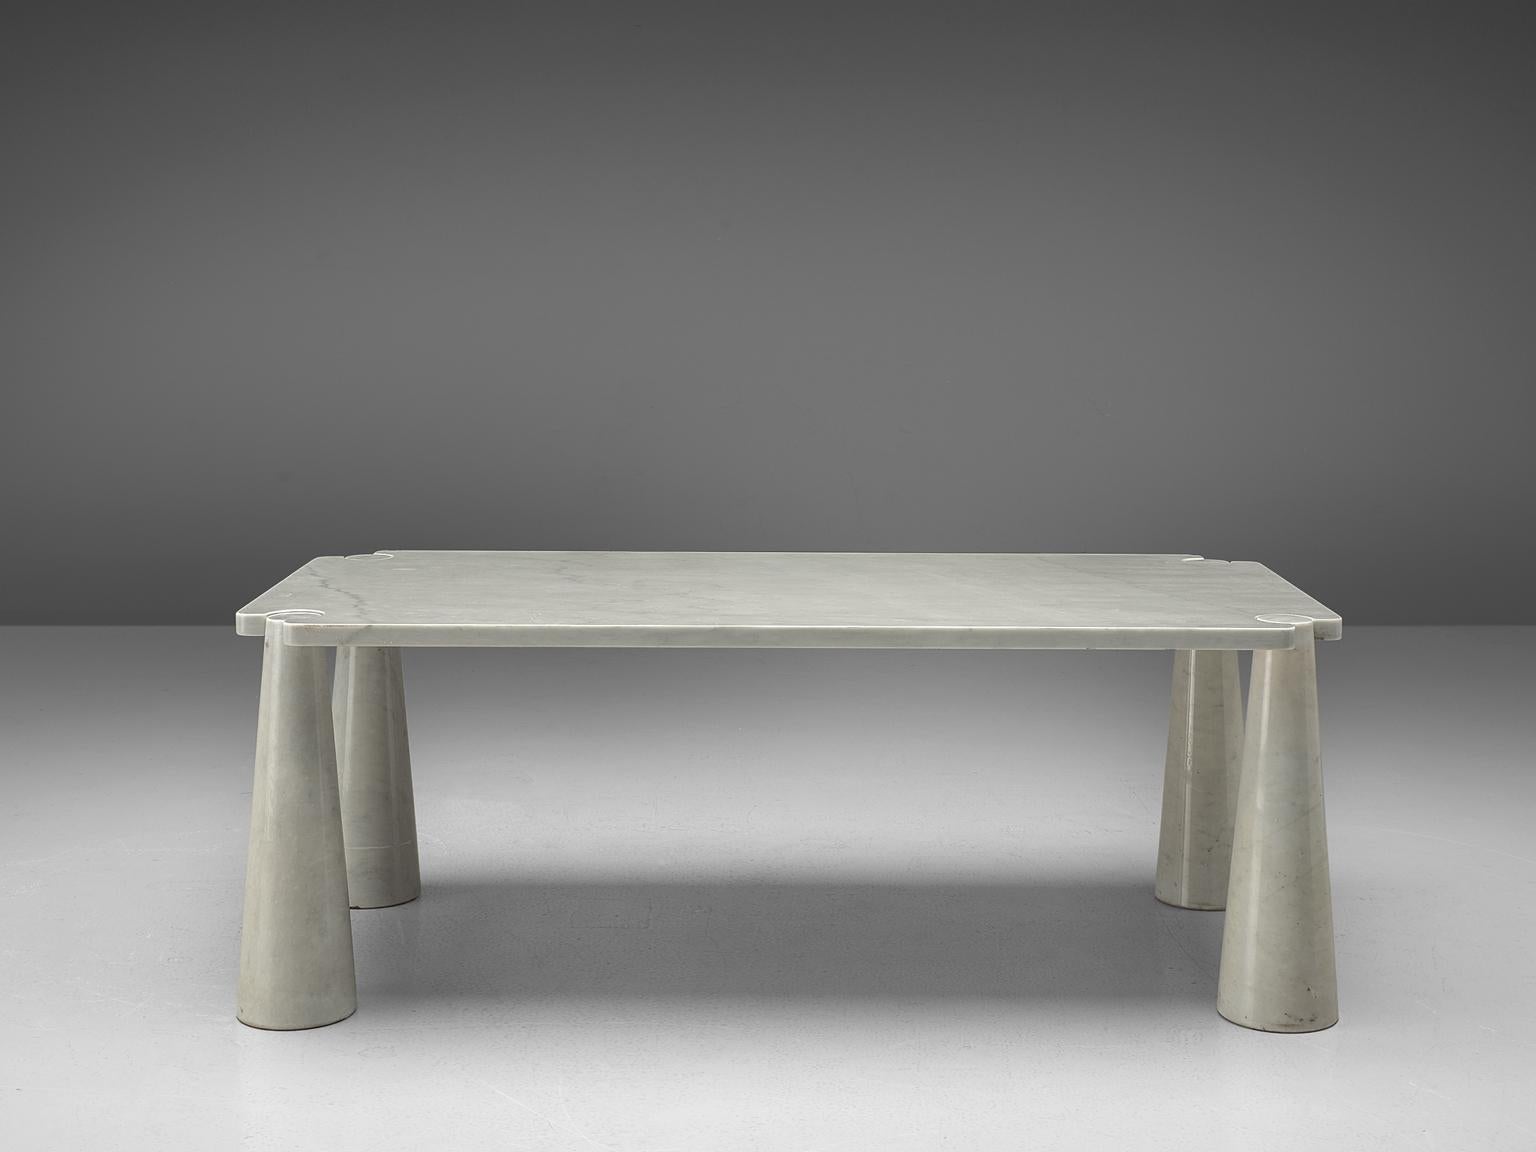 Angelo Mangiarotti for Skipper, 'Eros' dining table, Carrara marble, 1970s.

This sculptural, rectangular dining table by Angelo Mangiarotti is a skillful example of postmodern design. The table is executed in white Carrara marble. The table